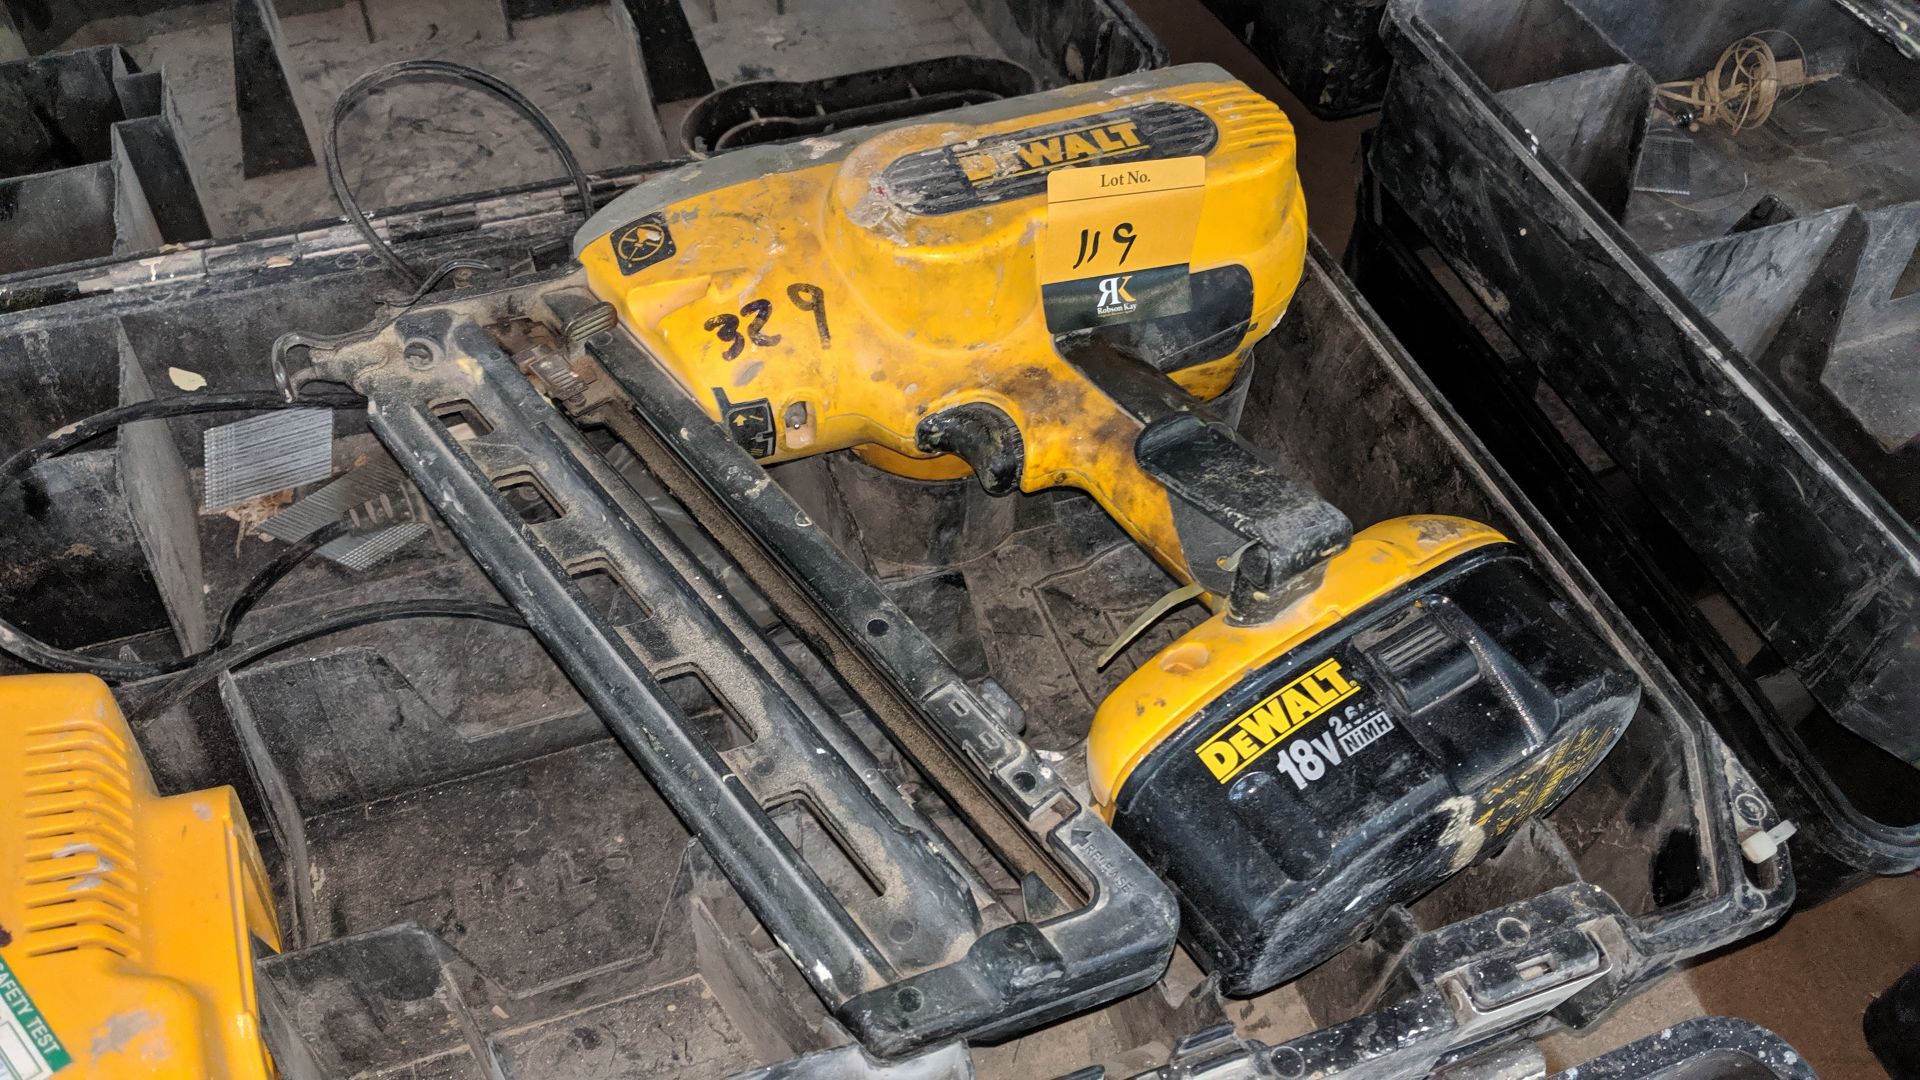 DeWalt cordless nail gun model DC618, including 1 off battery, 1 off charger & 1 off carry case - Image 3 of 3